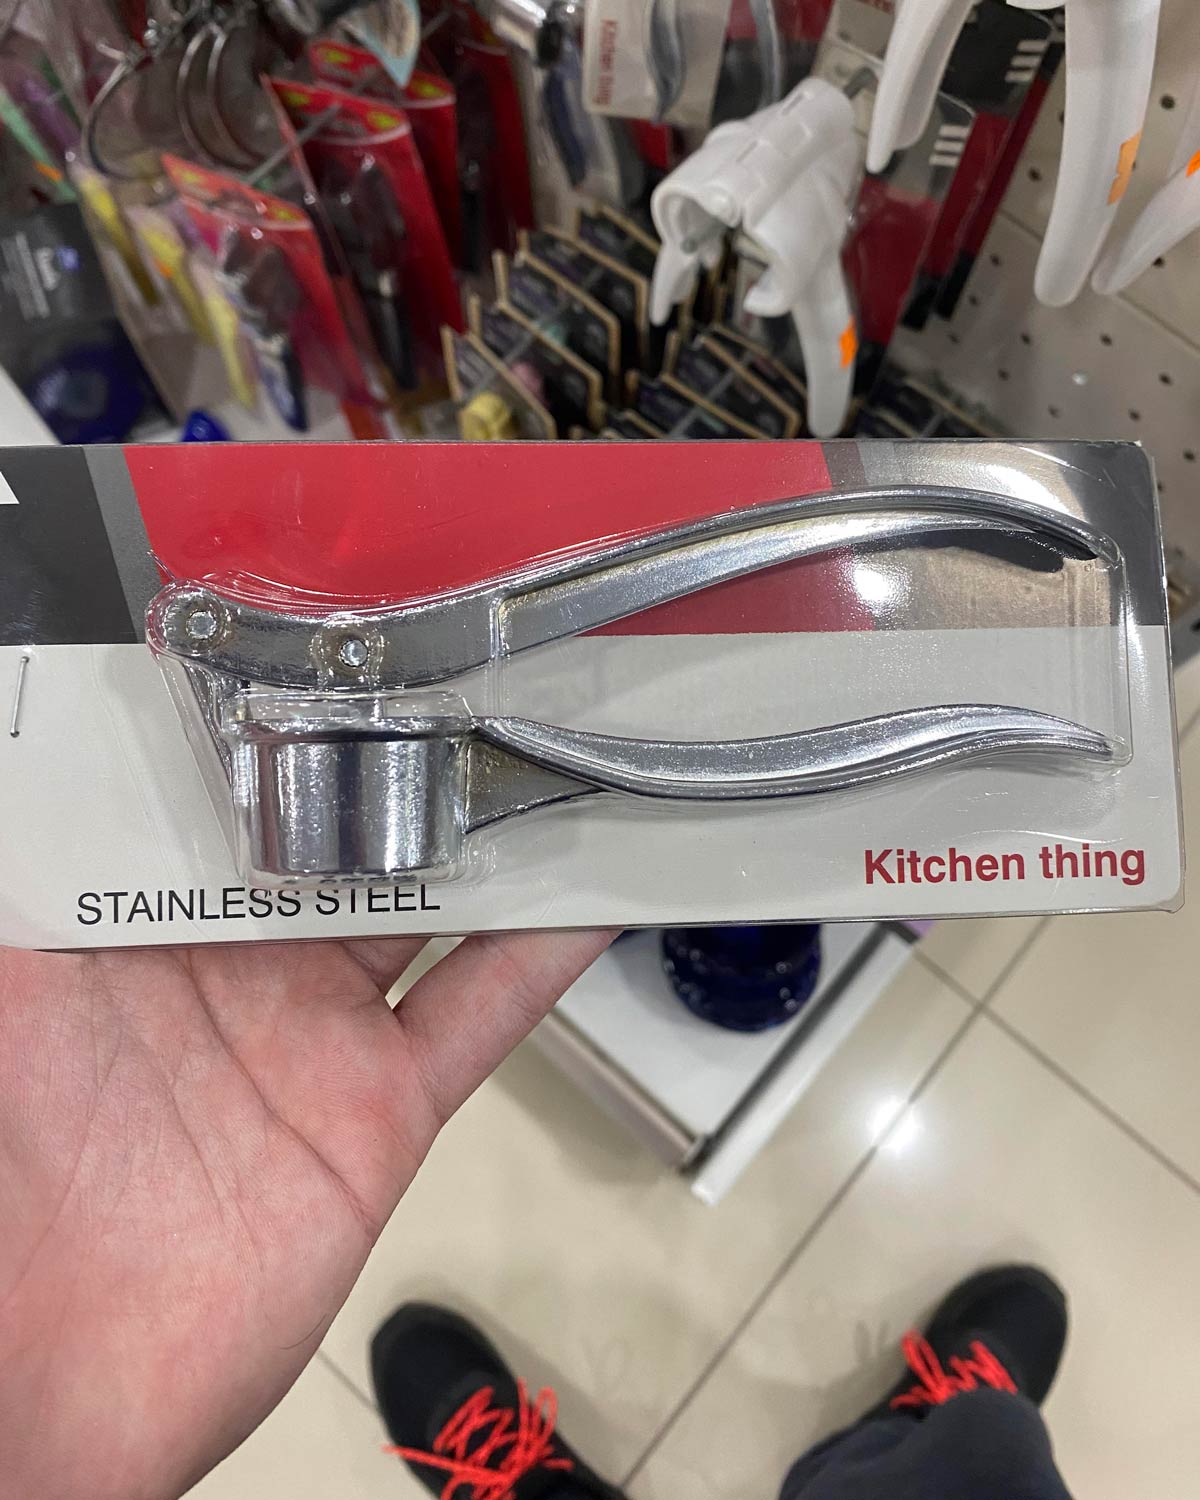 I present to you, the Kitchen thing